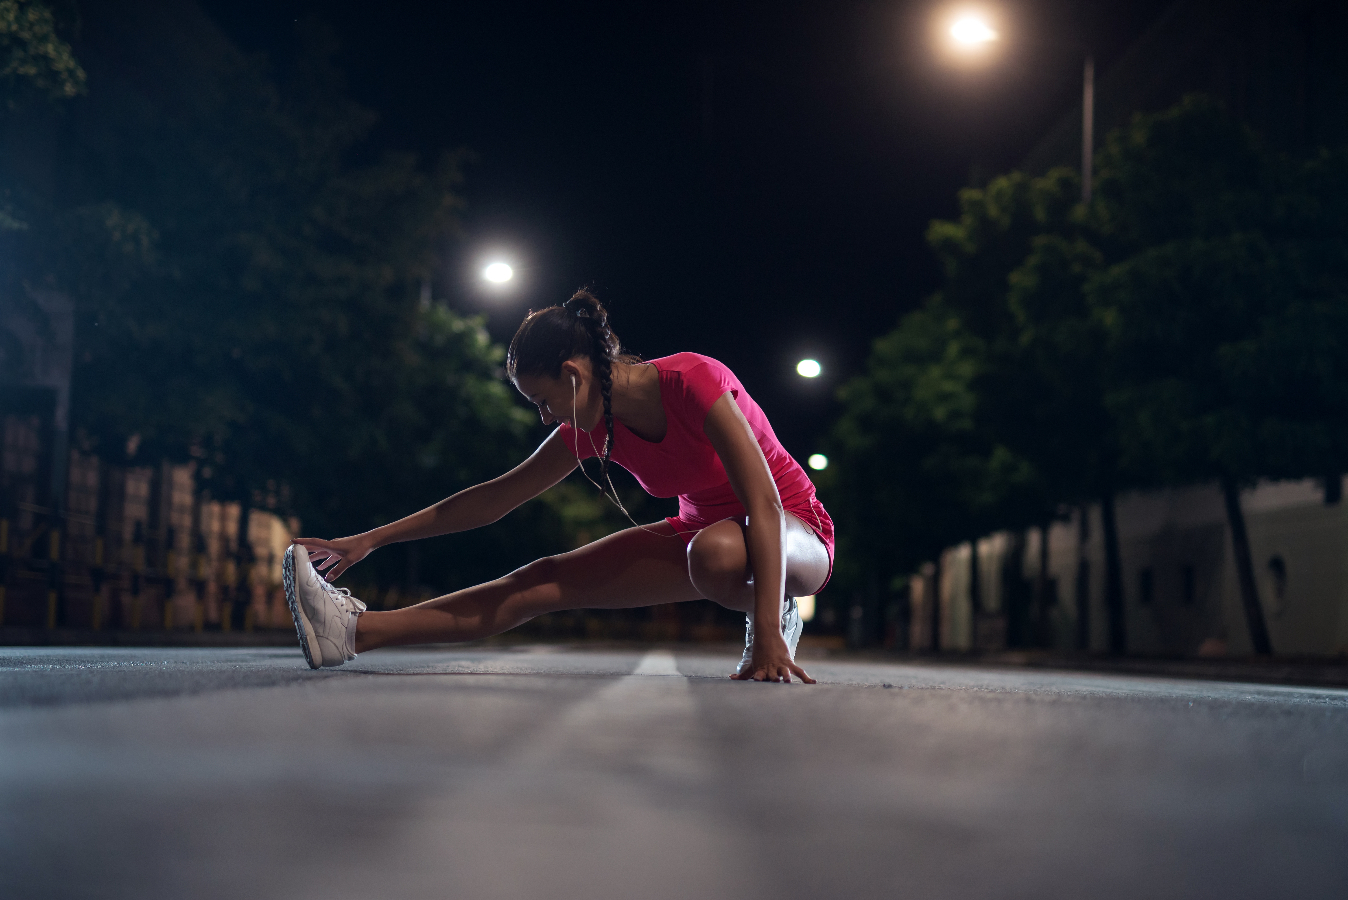 So, according to the study, exercising at night provides more benefits